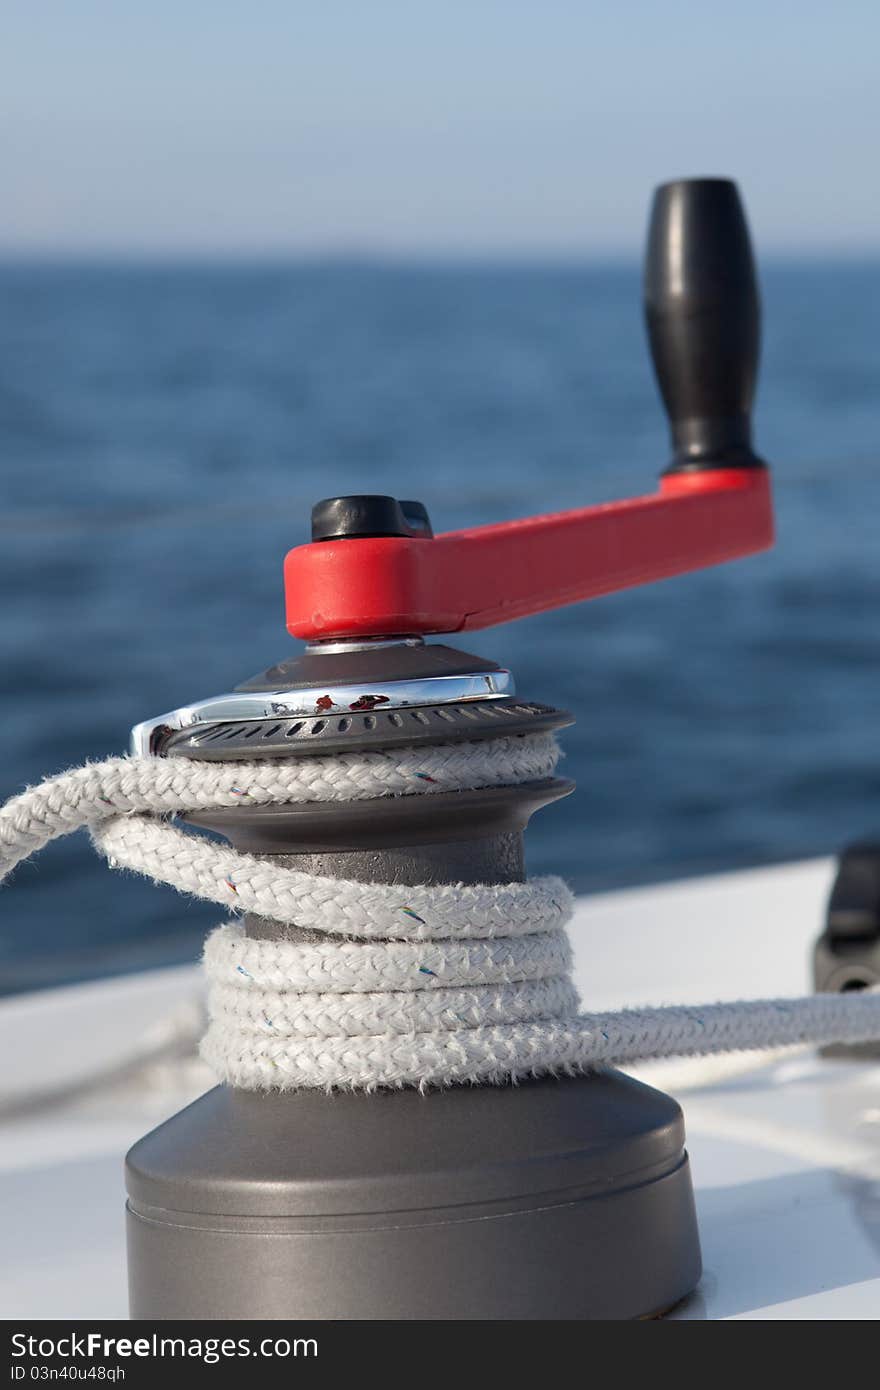 Equipment of sail yacht. Winch with grip. Equipment of sail yacht. Winch with grip.